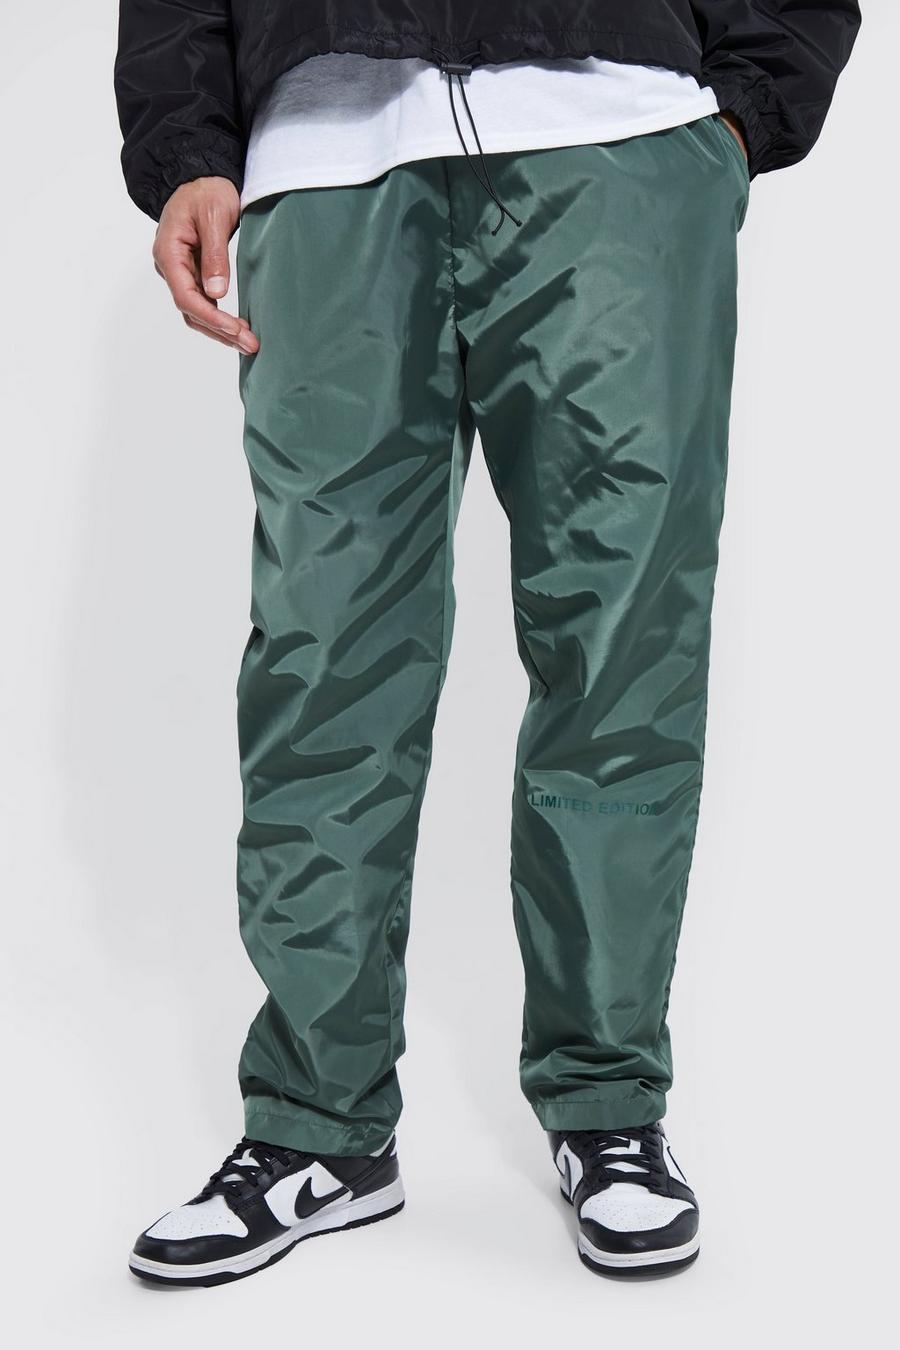 Tall Elastic Waist Limited Edition Trouser , Forest gerde